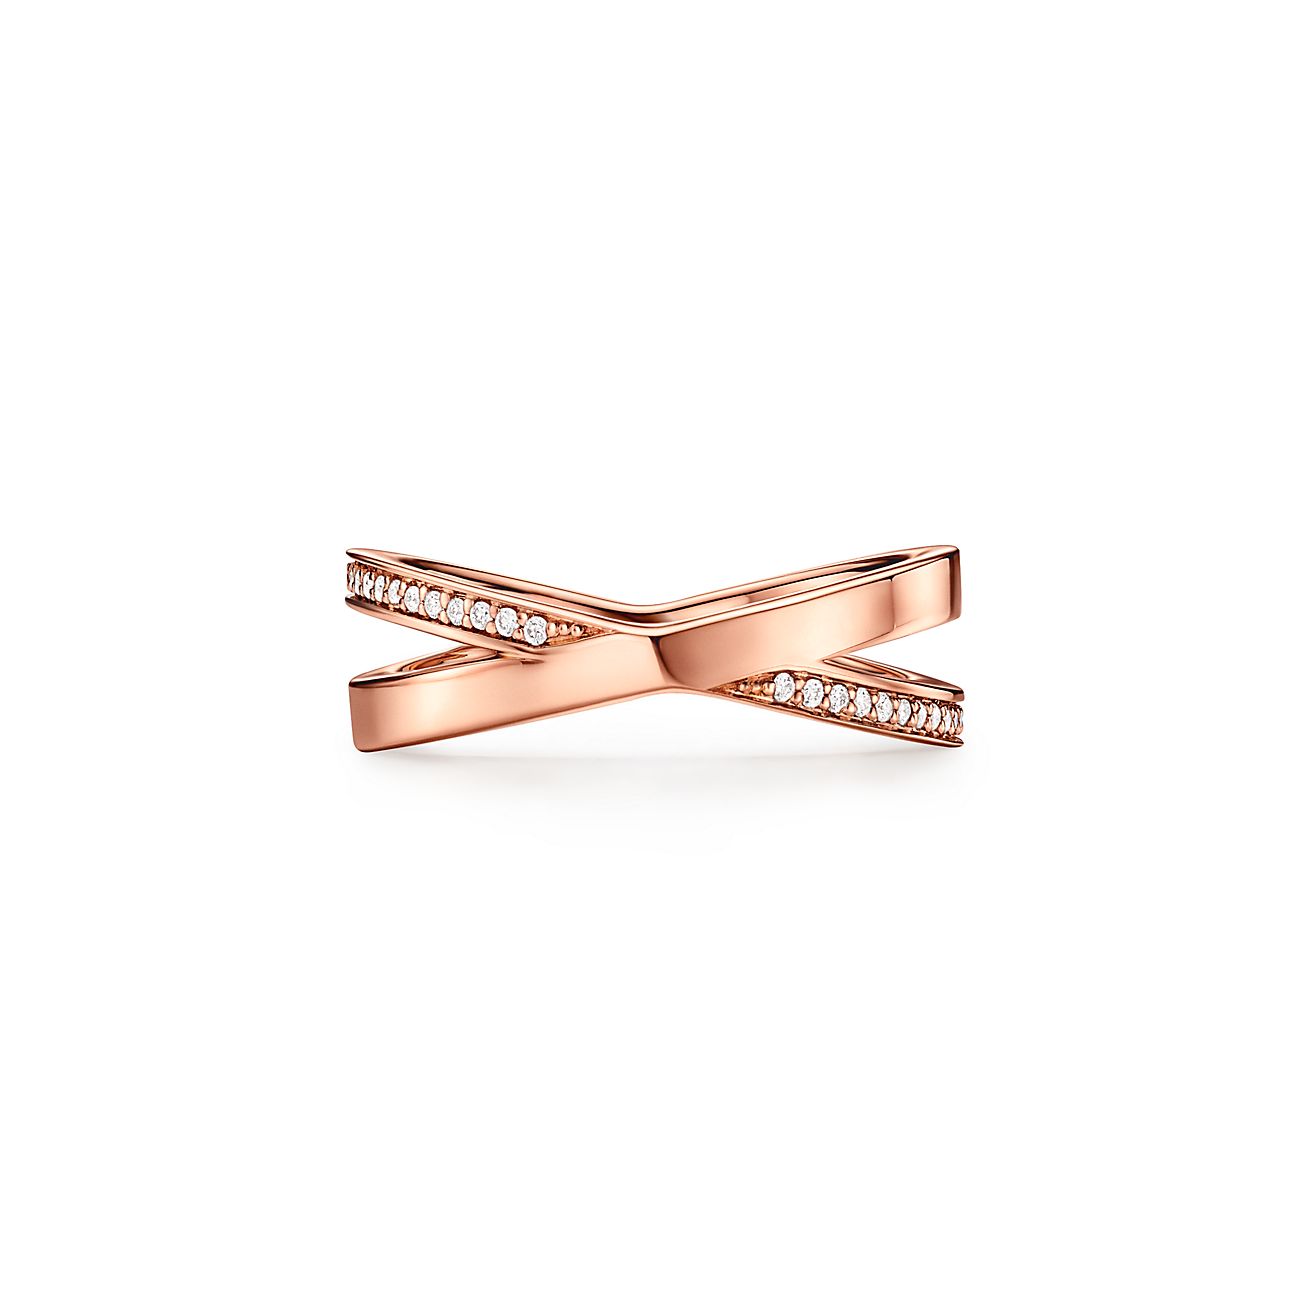 Atlas® X Closed Narrow Ring in White Gold, 3 mm Wide | Tiffany & Co.